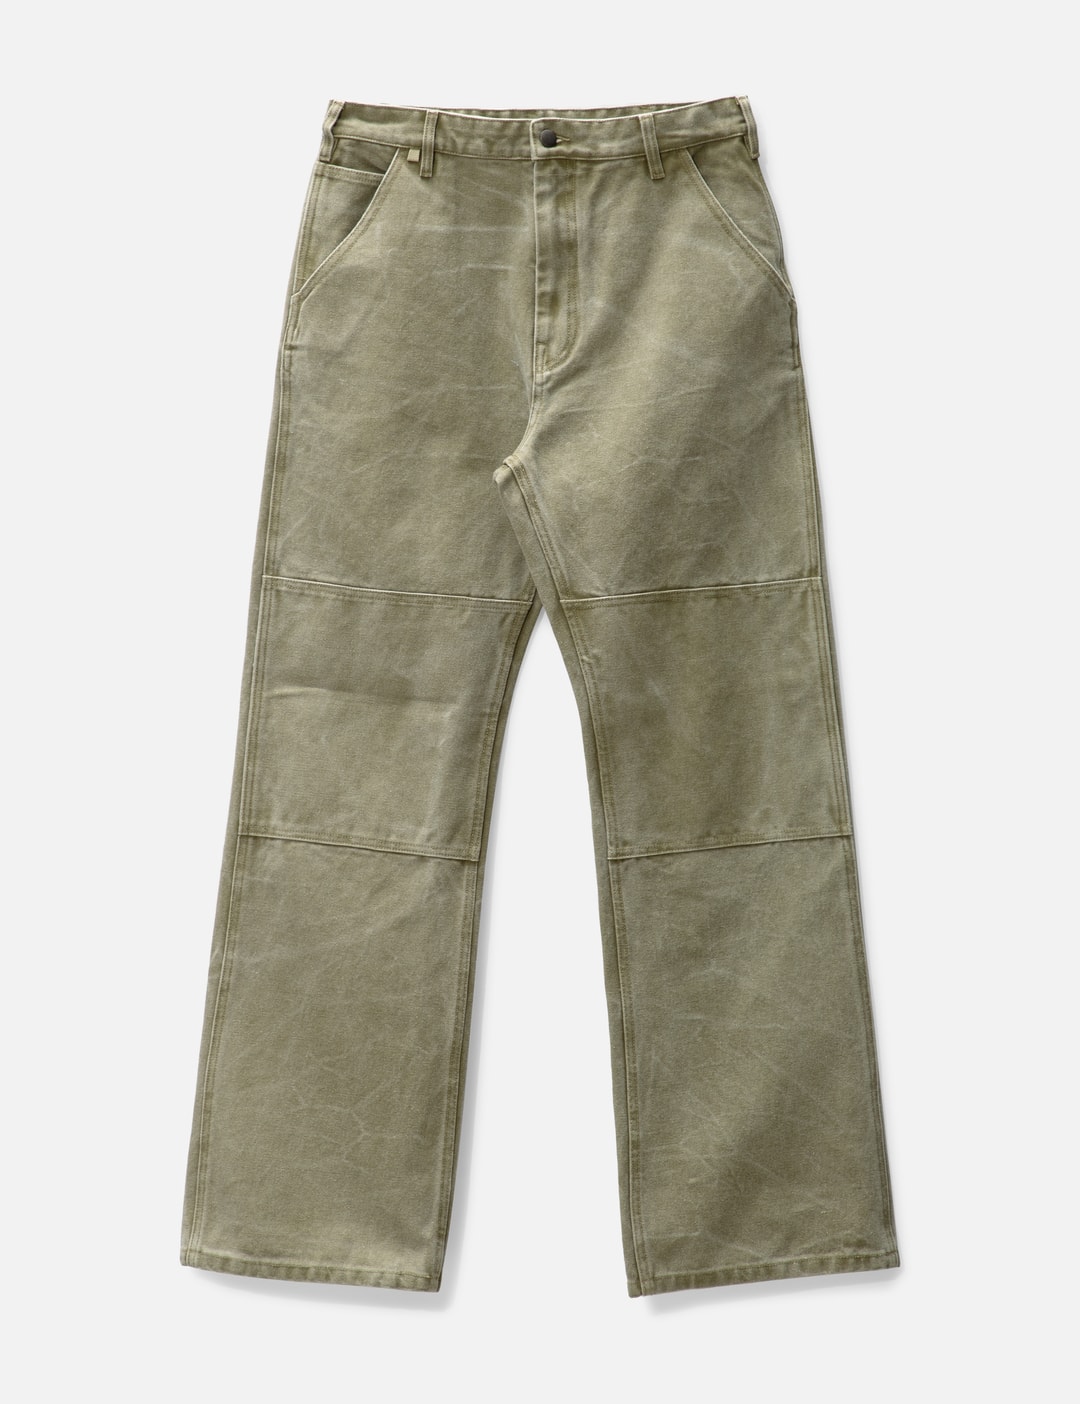 Acne Studios - Regular Fit Canvas Trousers | HBX - Globally Curated ...